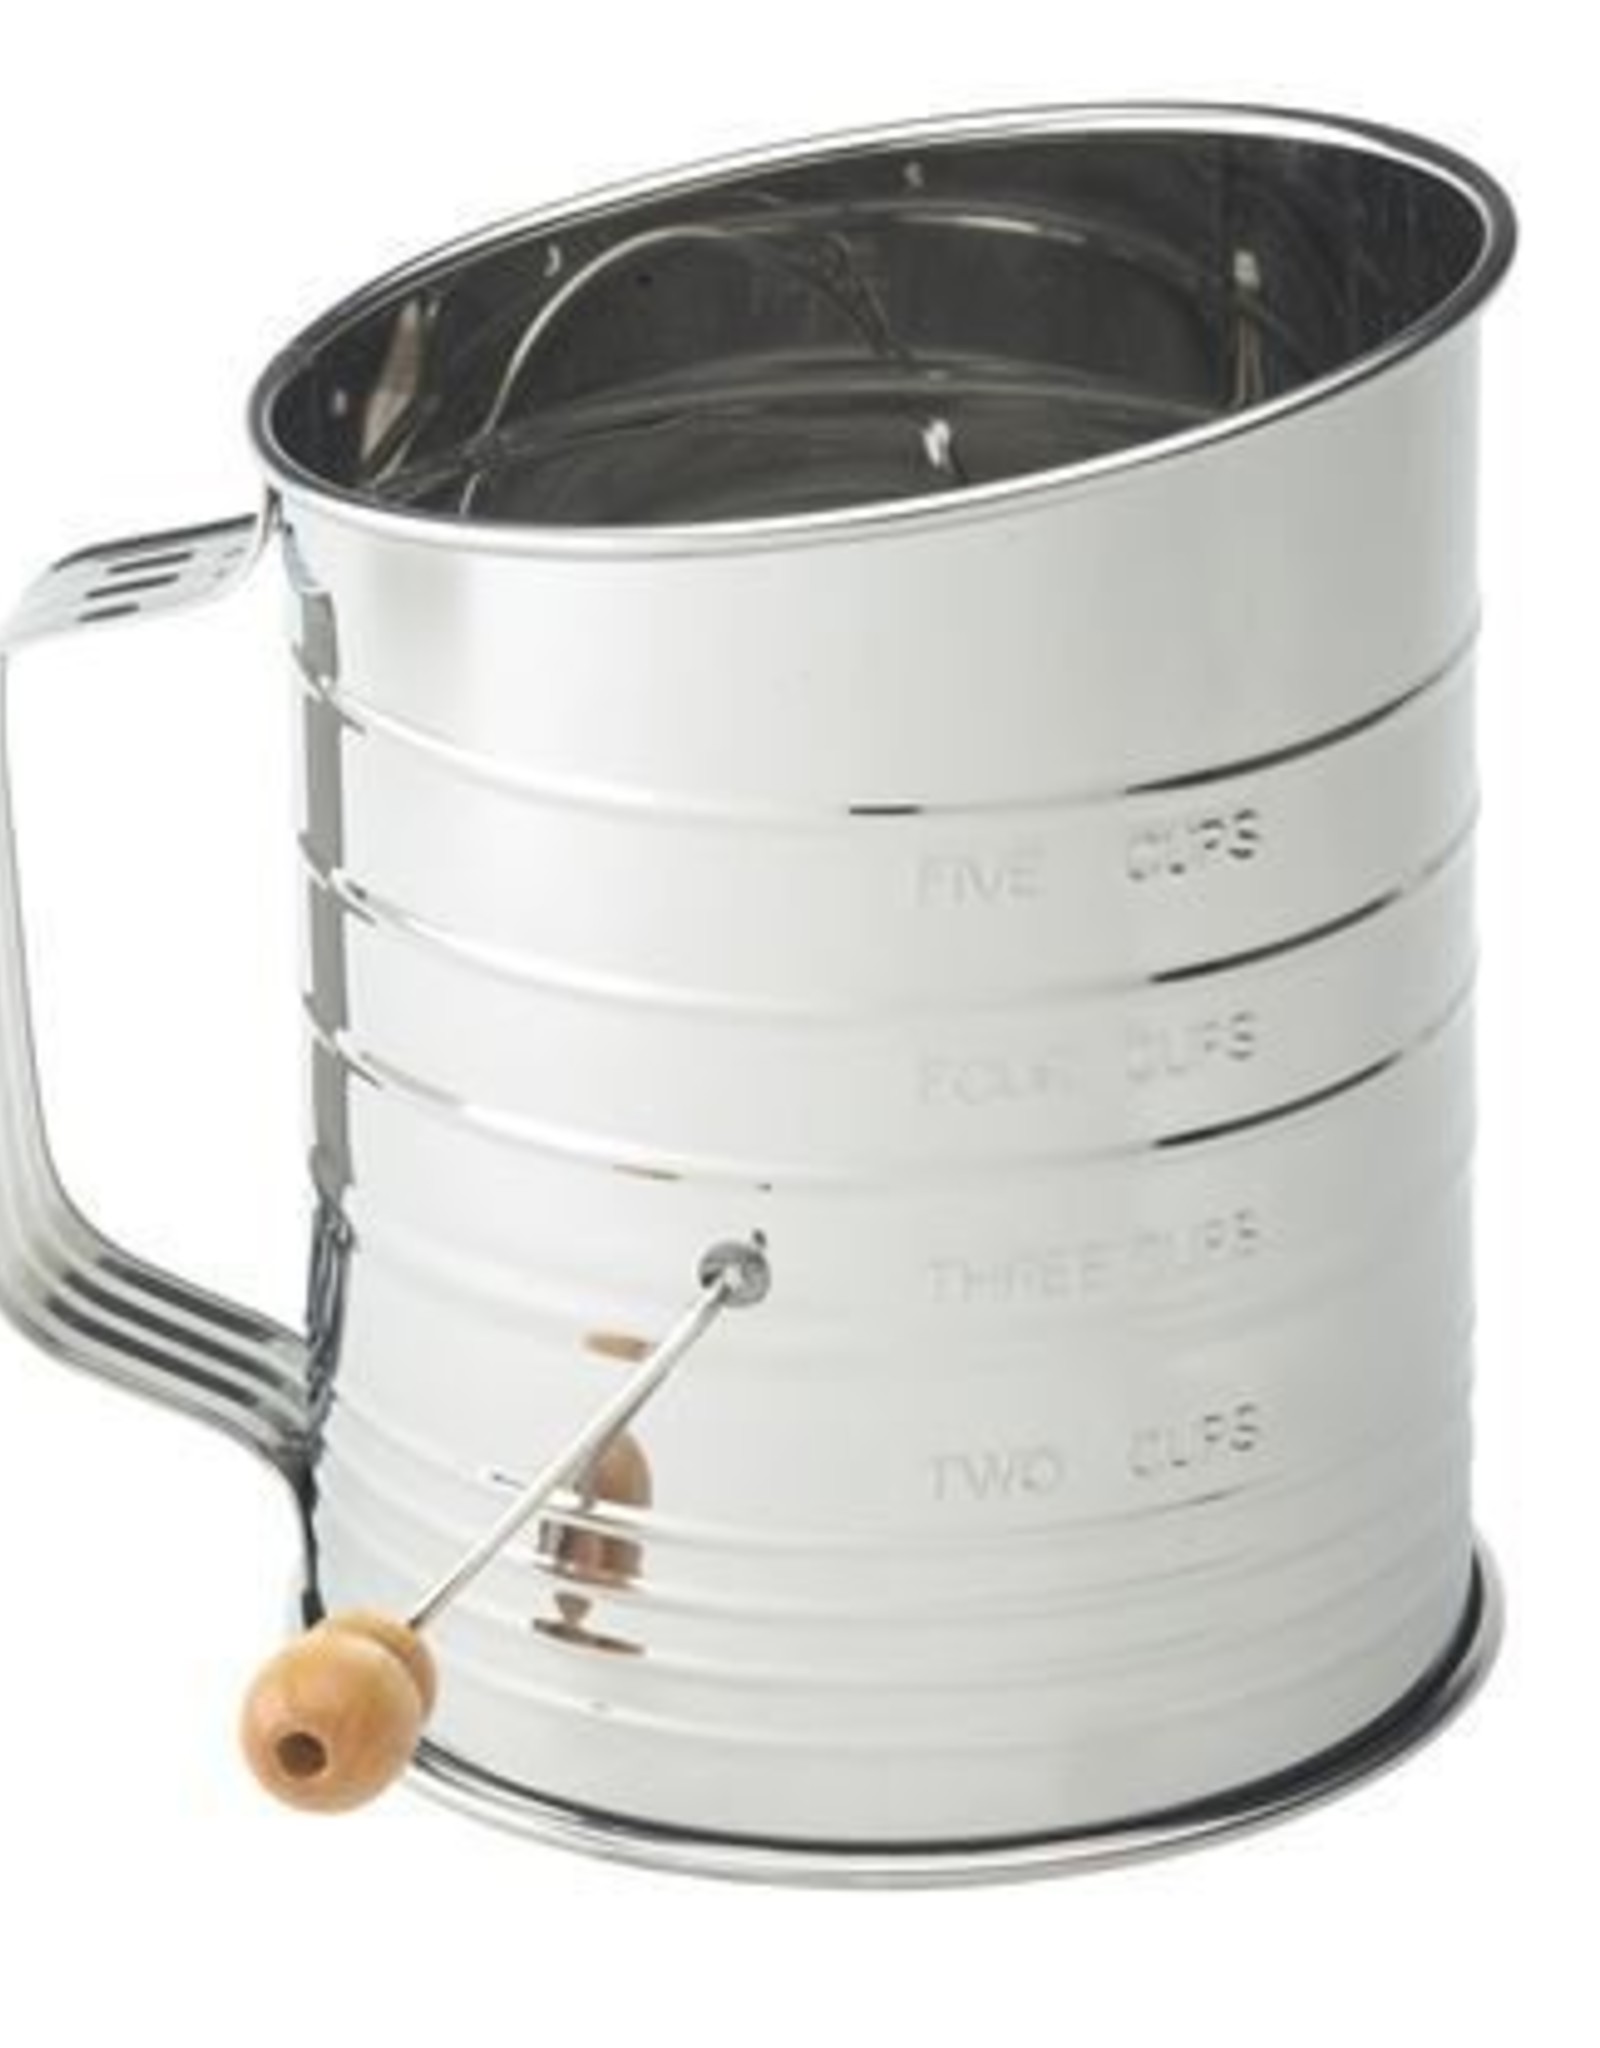 Sifter 5 Cup Crank (Stainless steel)